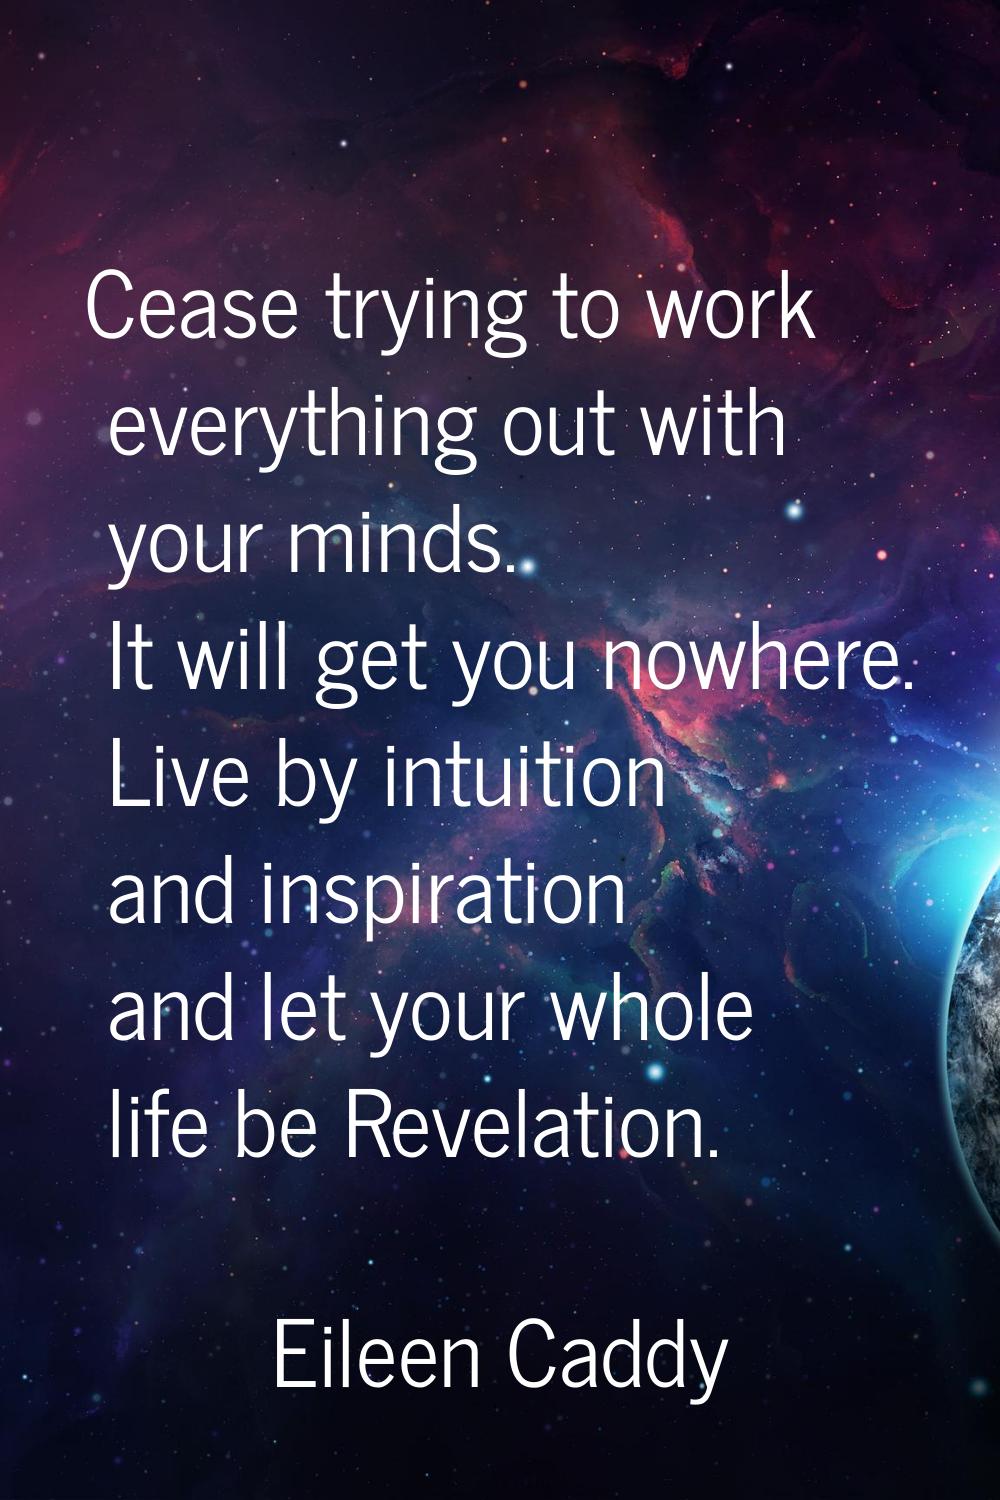 Cease trying to work everything out with your minds. It will get you nowhere. Live by intuition and